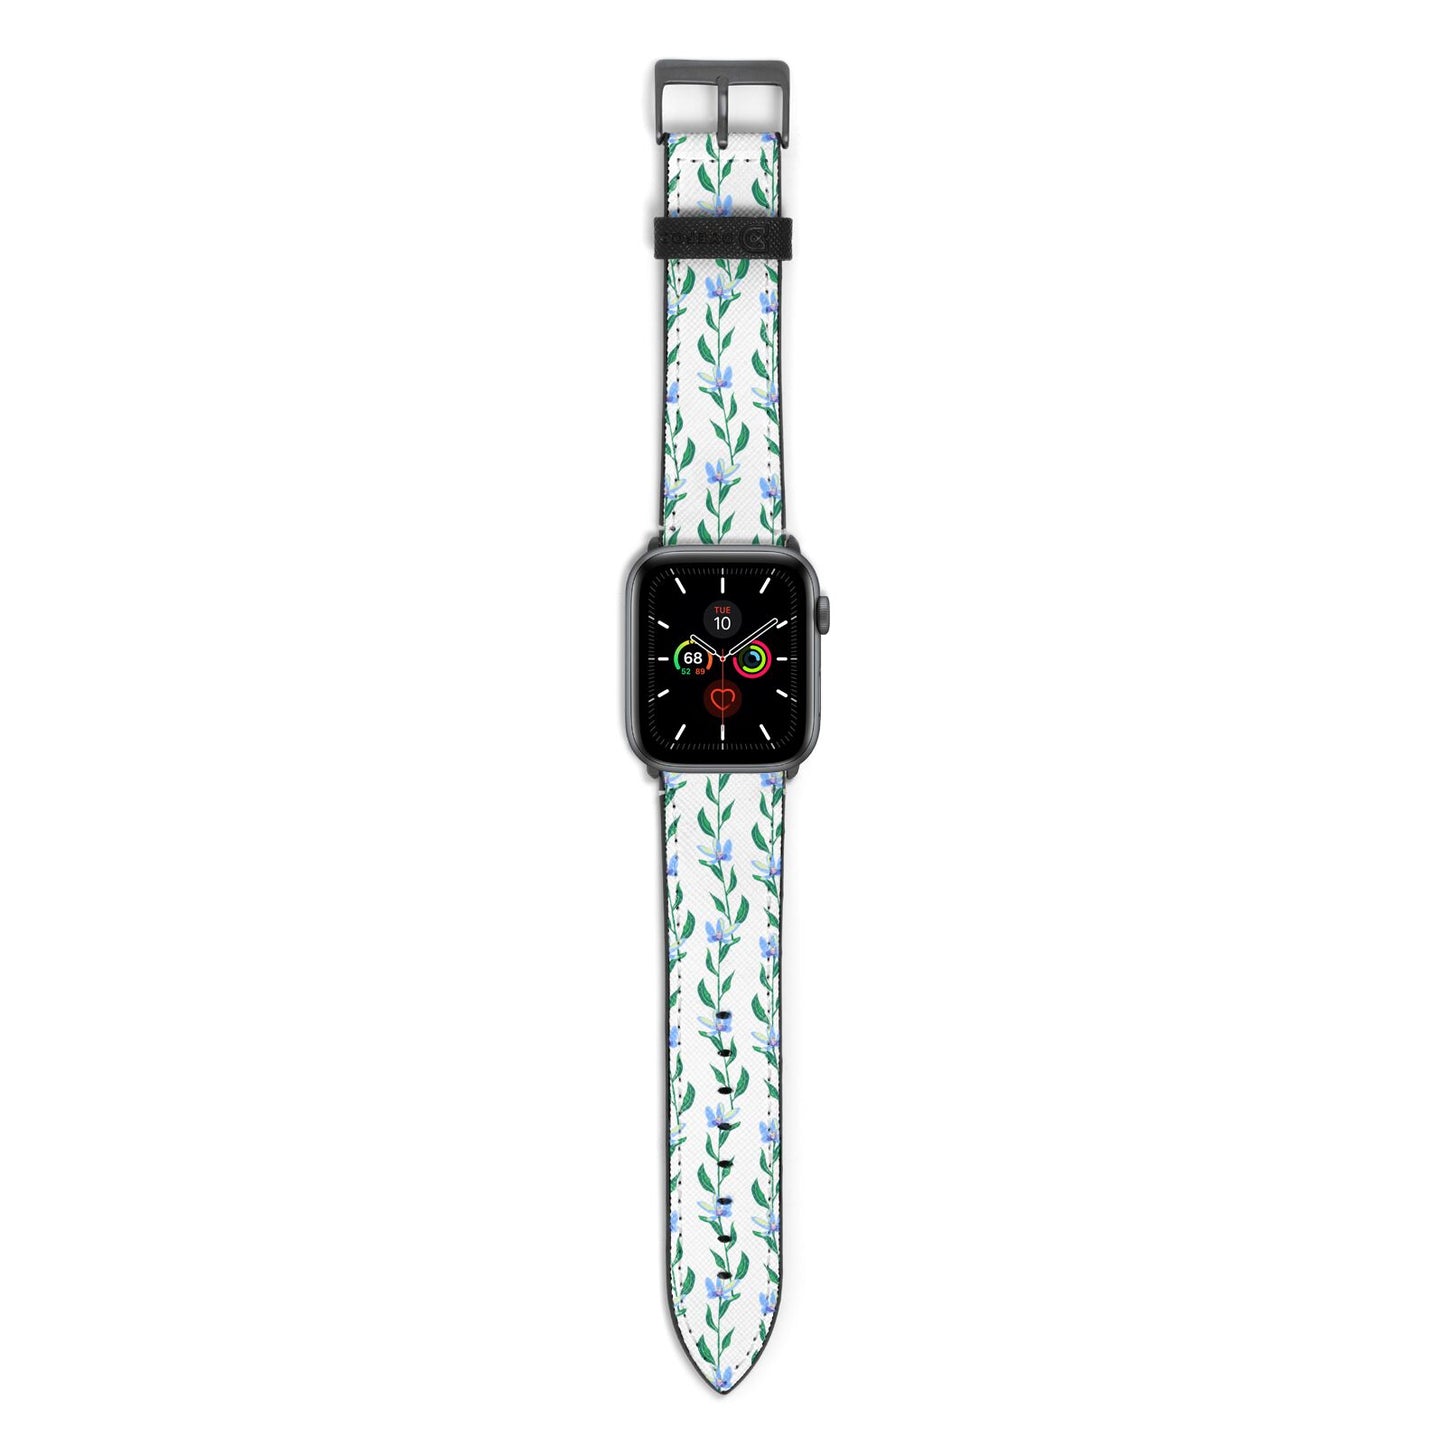 Flower Chain Apple Watch Strap with Space Grey Hardware